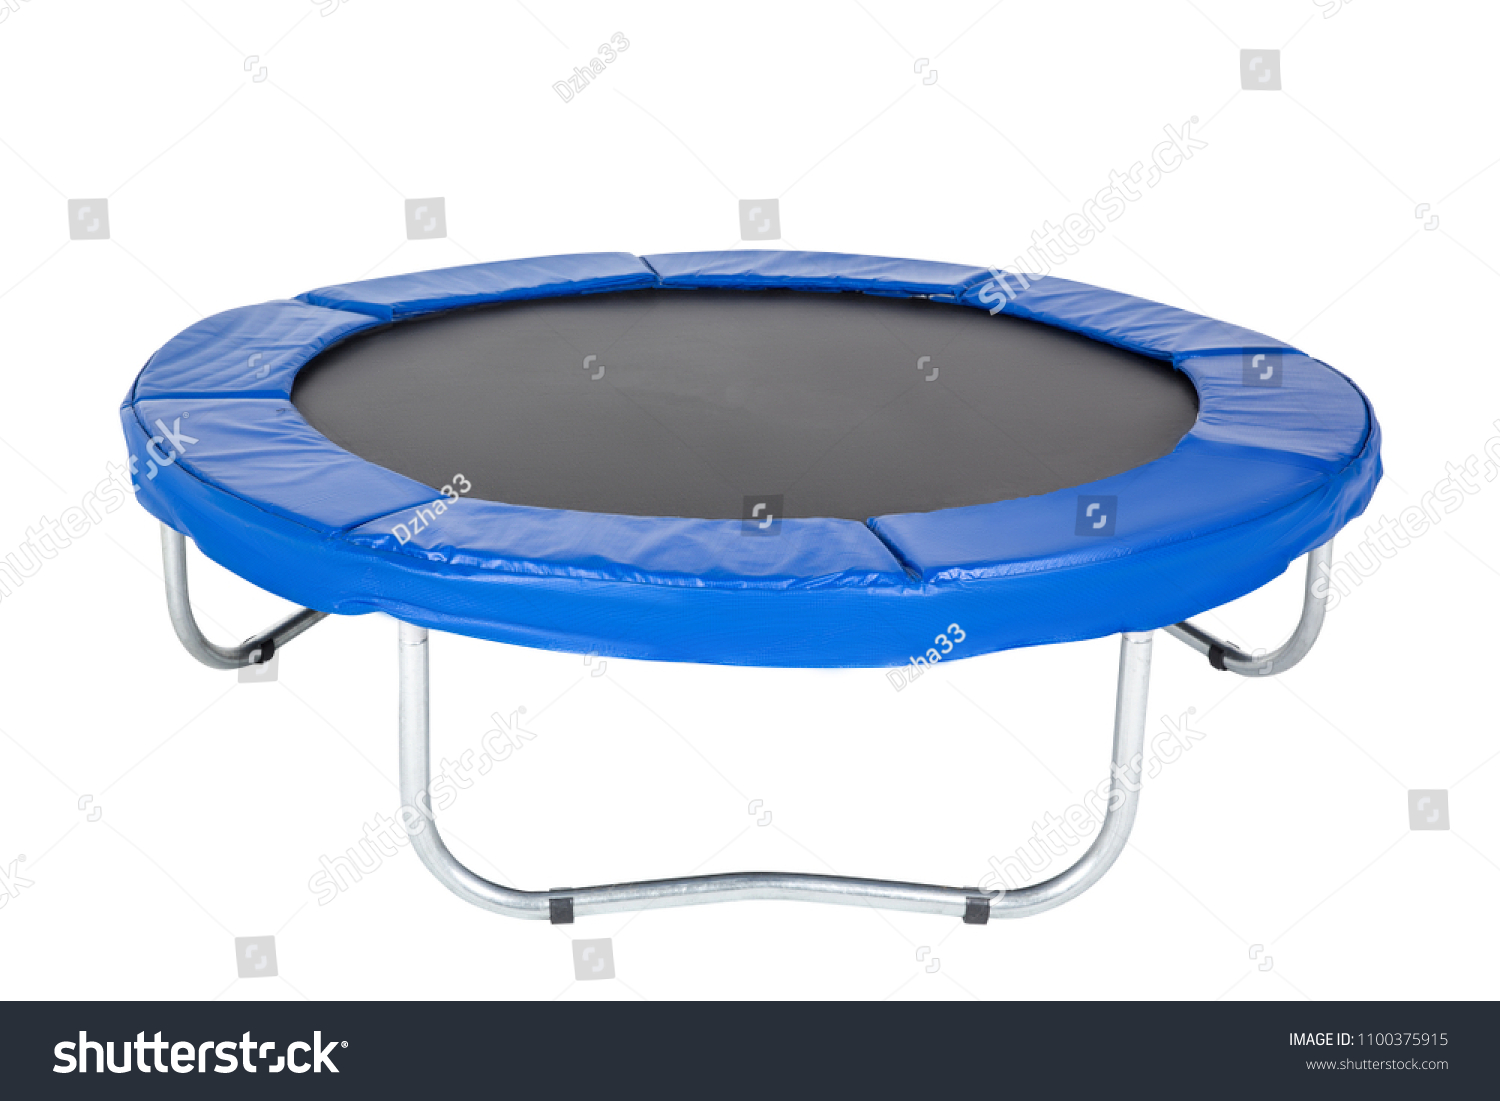 Trampoline for children and adults for fun indoor or outdoor fitness jumping on white background. Blue trampoline Isolated  #1100375915